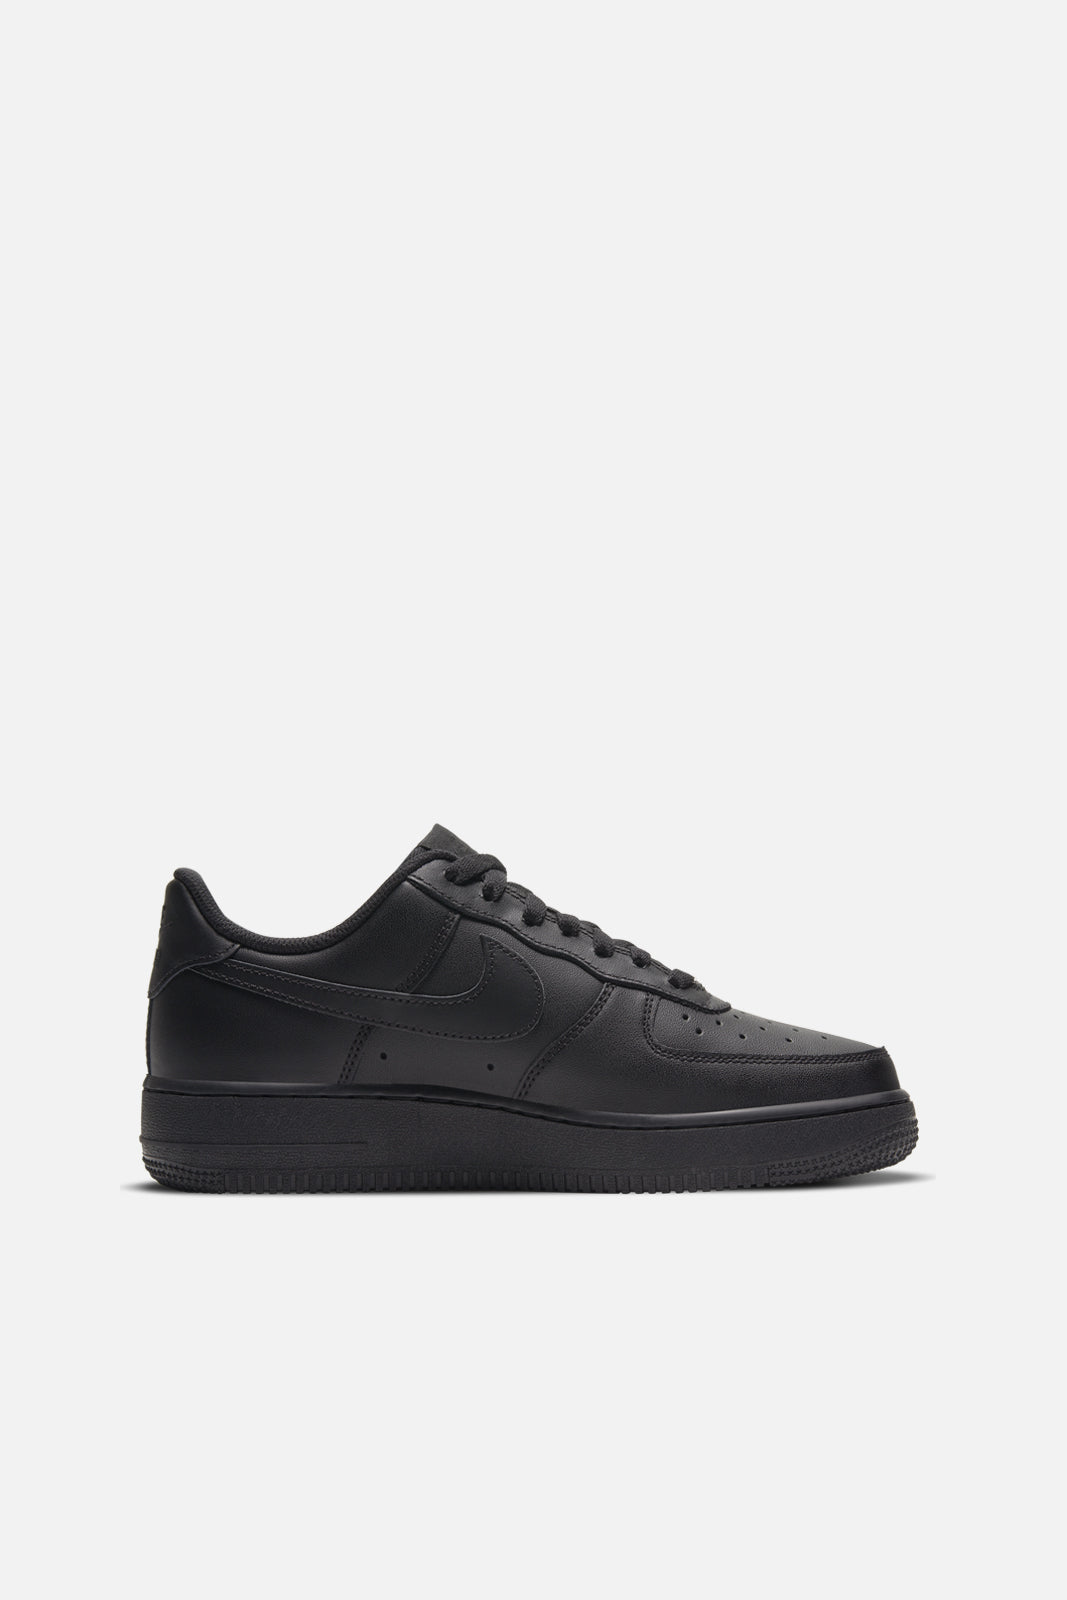 nike air force outlet online